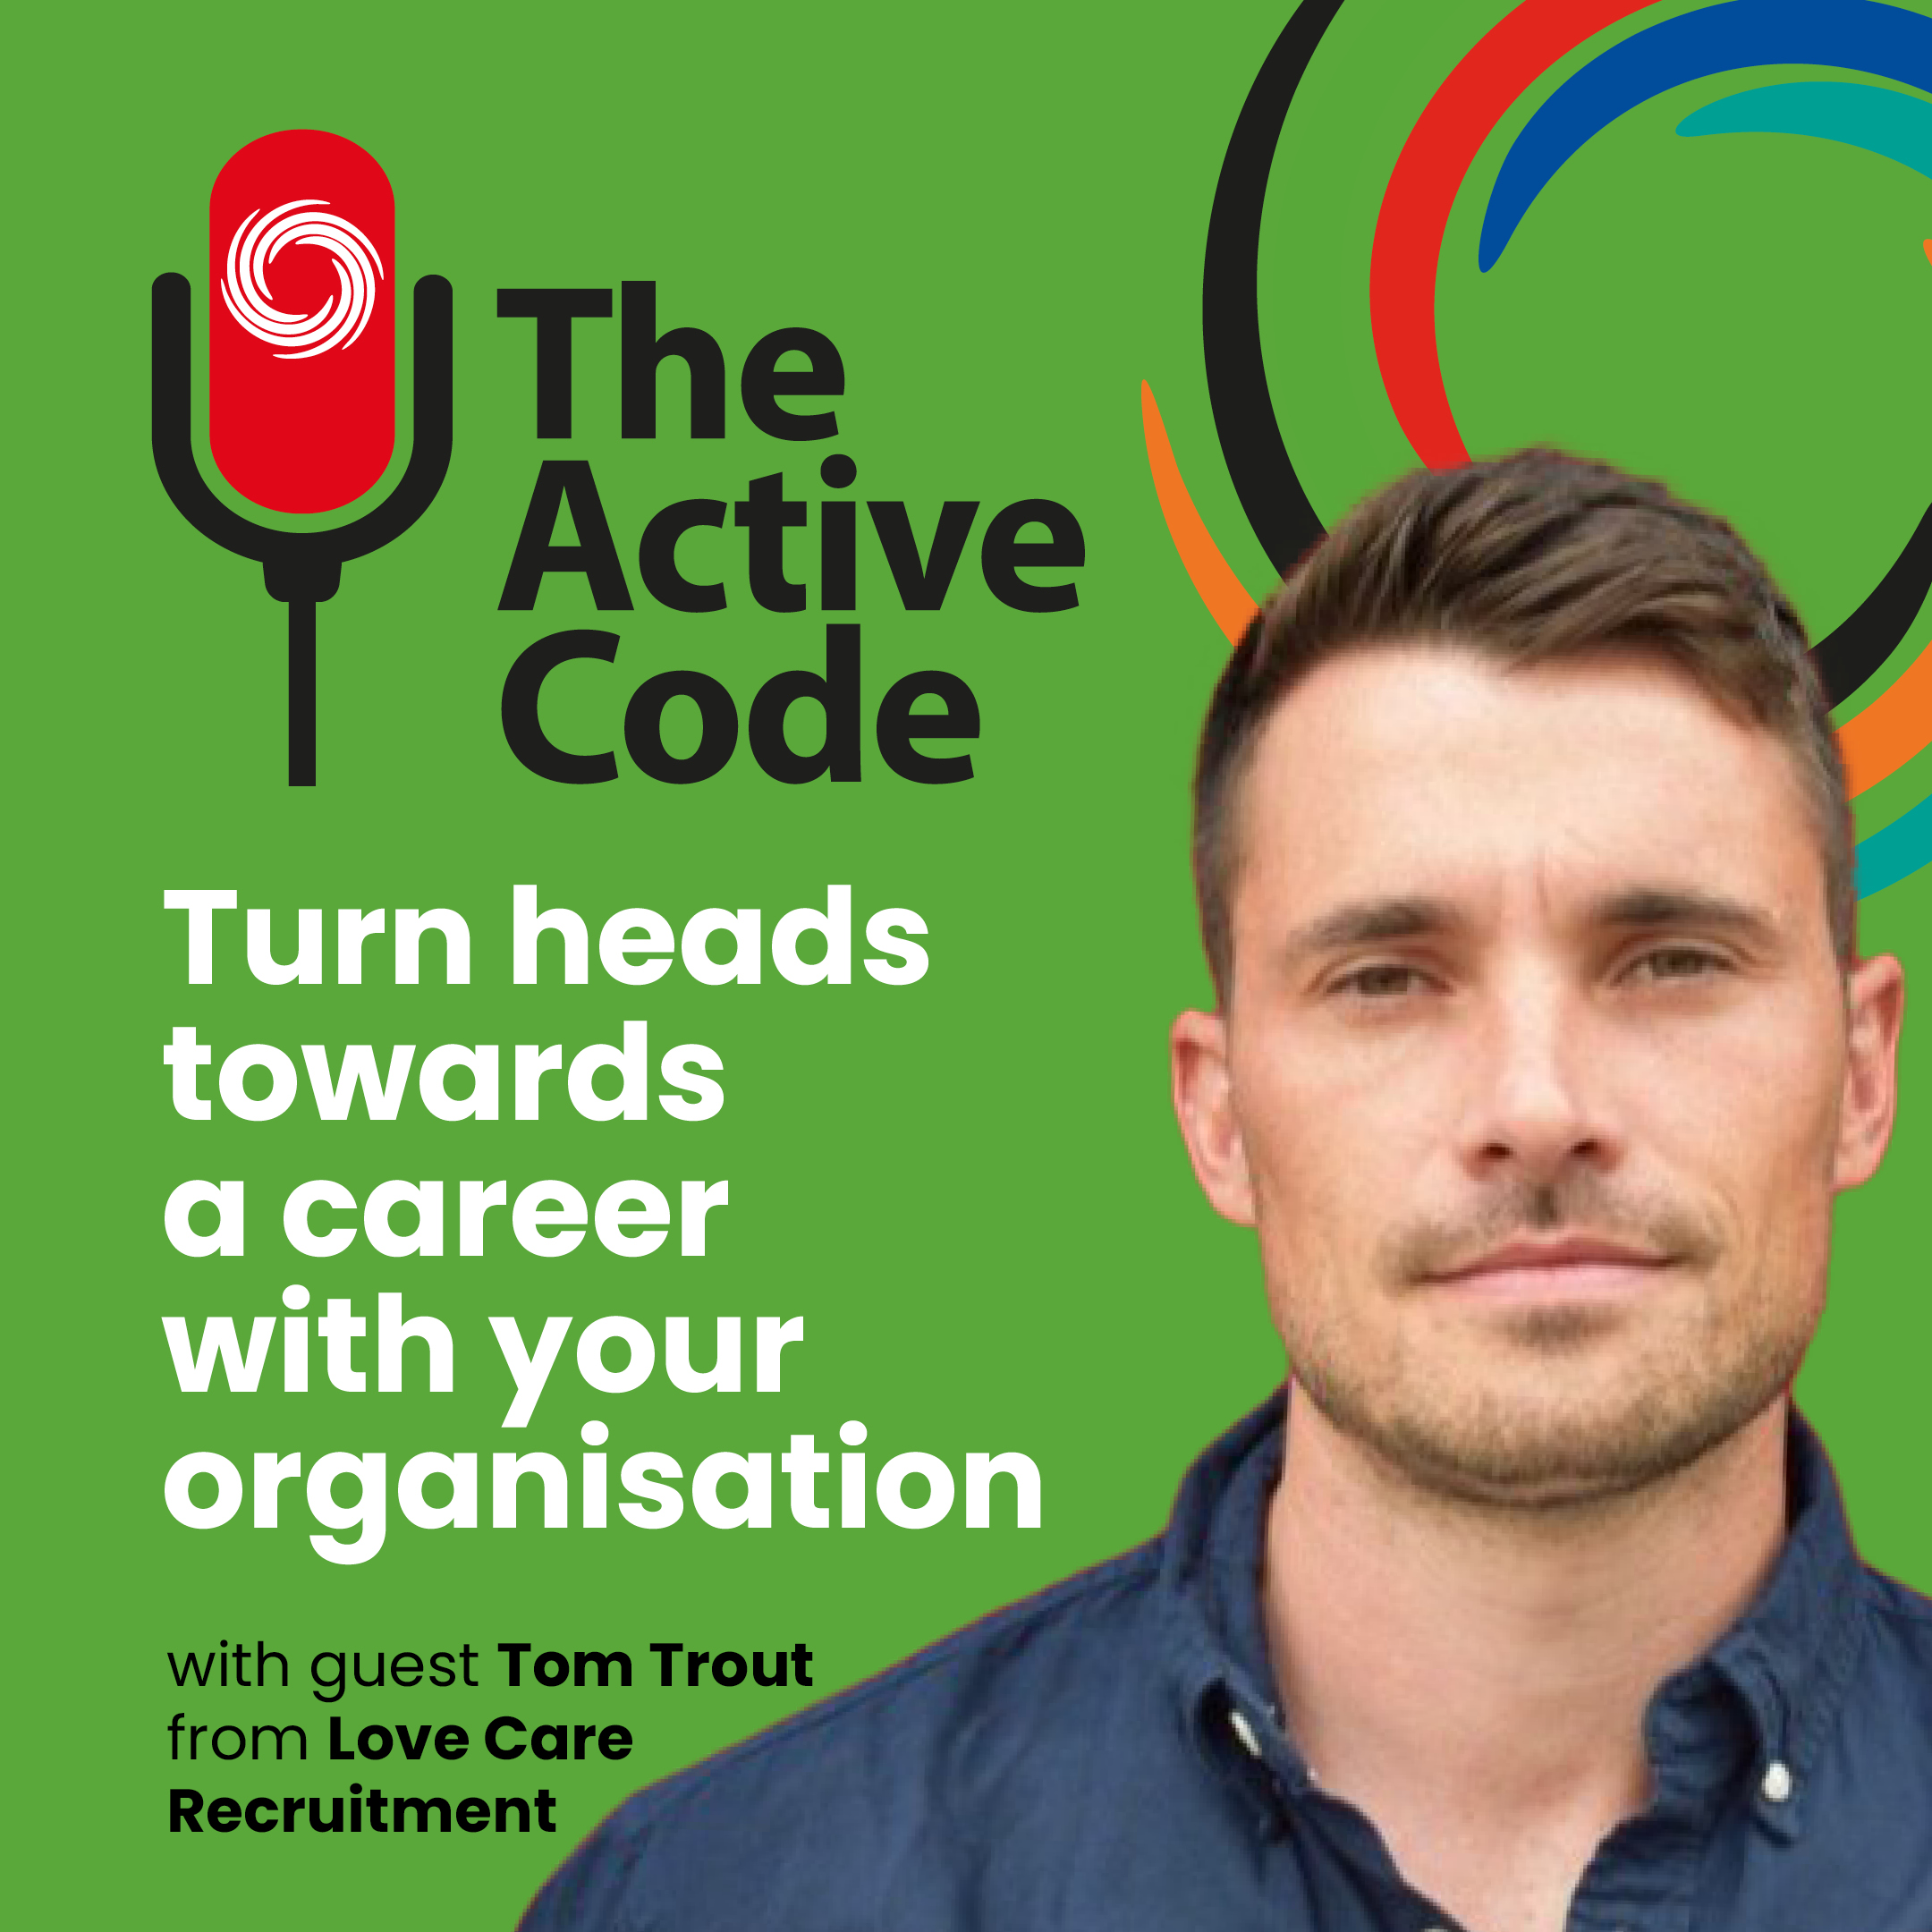 The Active Code – Turn heads towards a career with your organisation